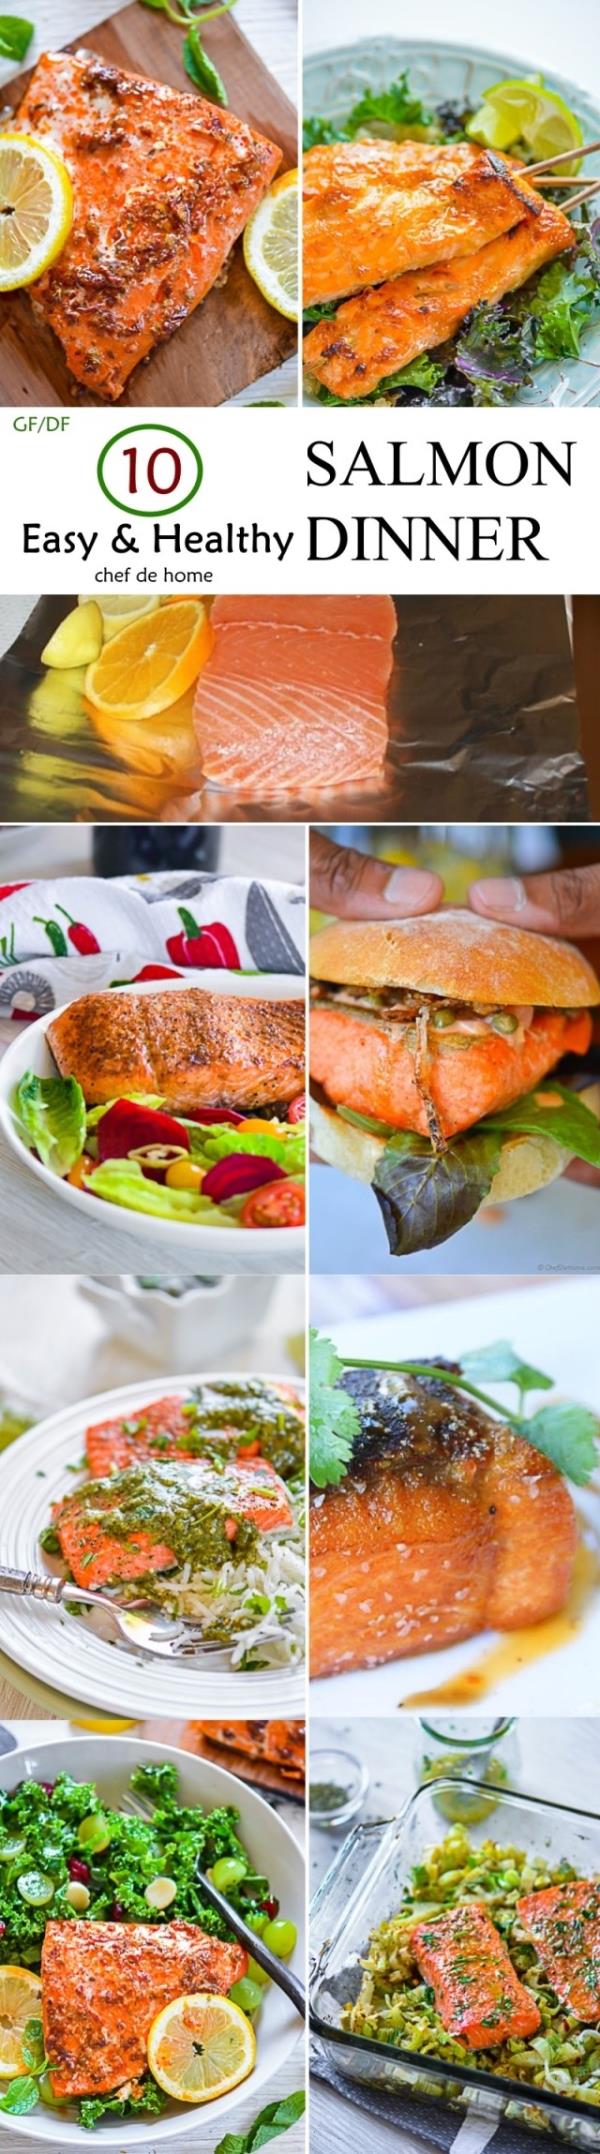 10 Easy and Healthy Salmon Recipes Meals -ChefDeHome.com